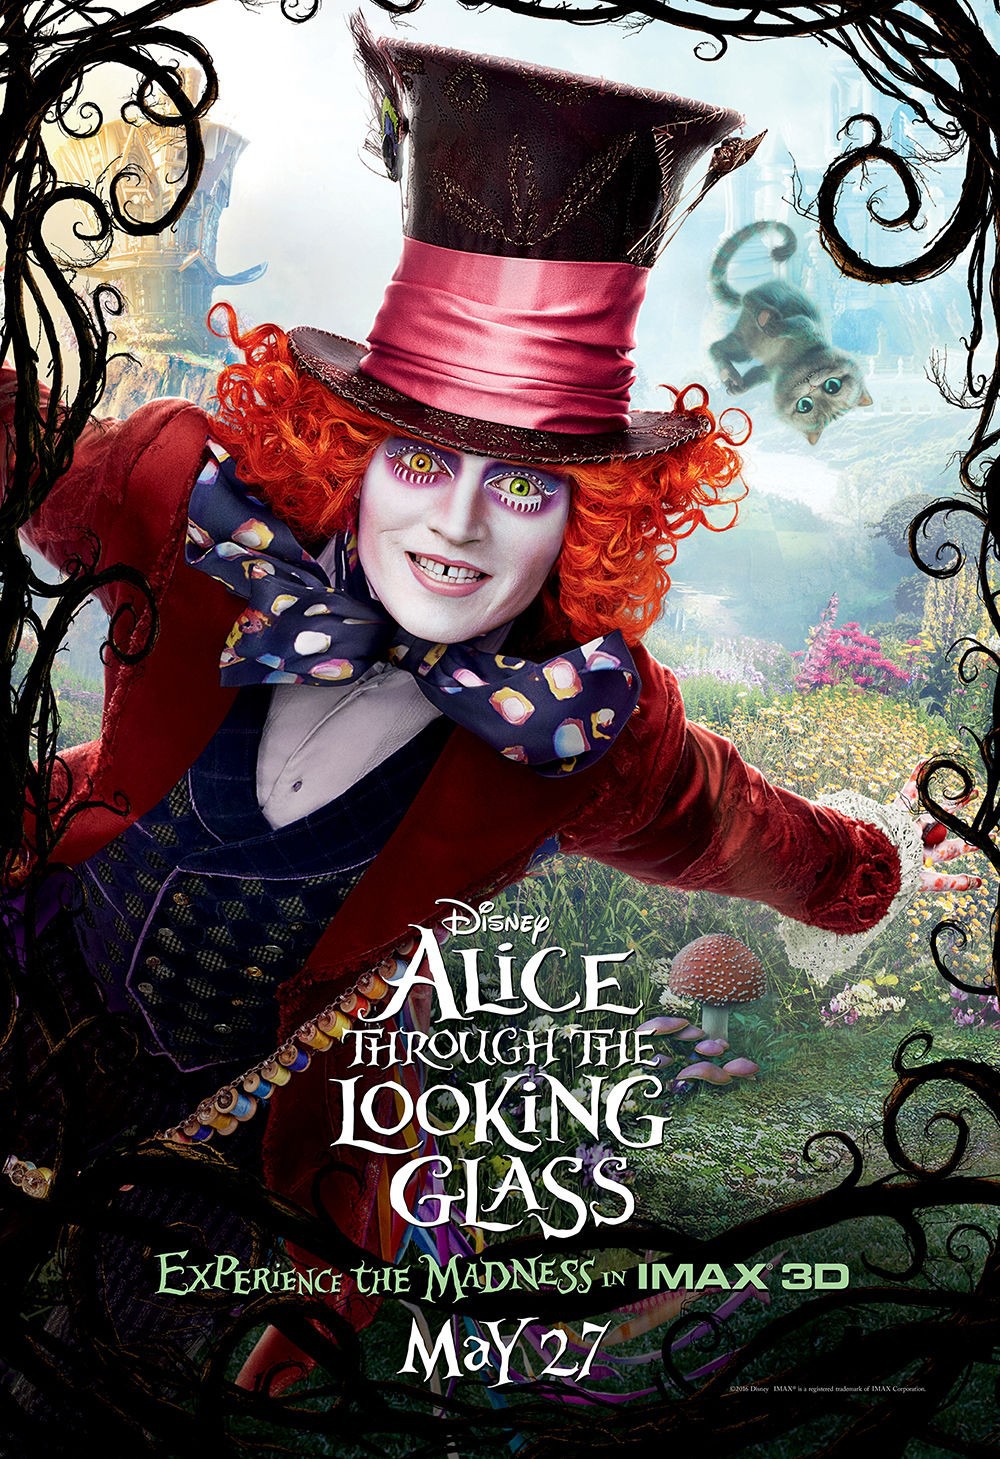 Extra Large Movie Poster Image for Alice Through the Looking Glass (#23 of 24)